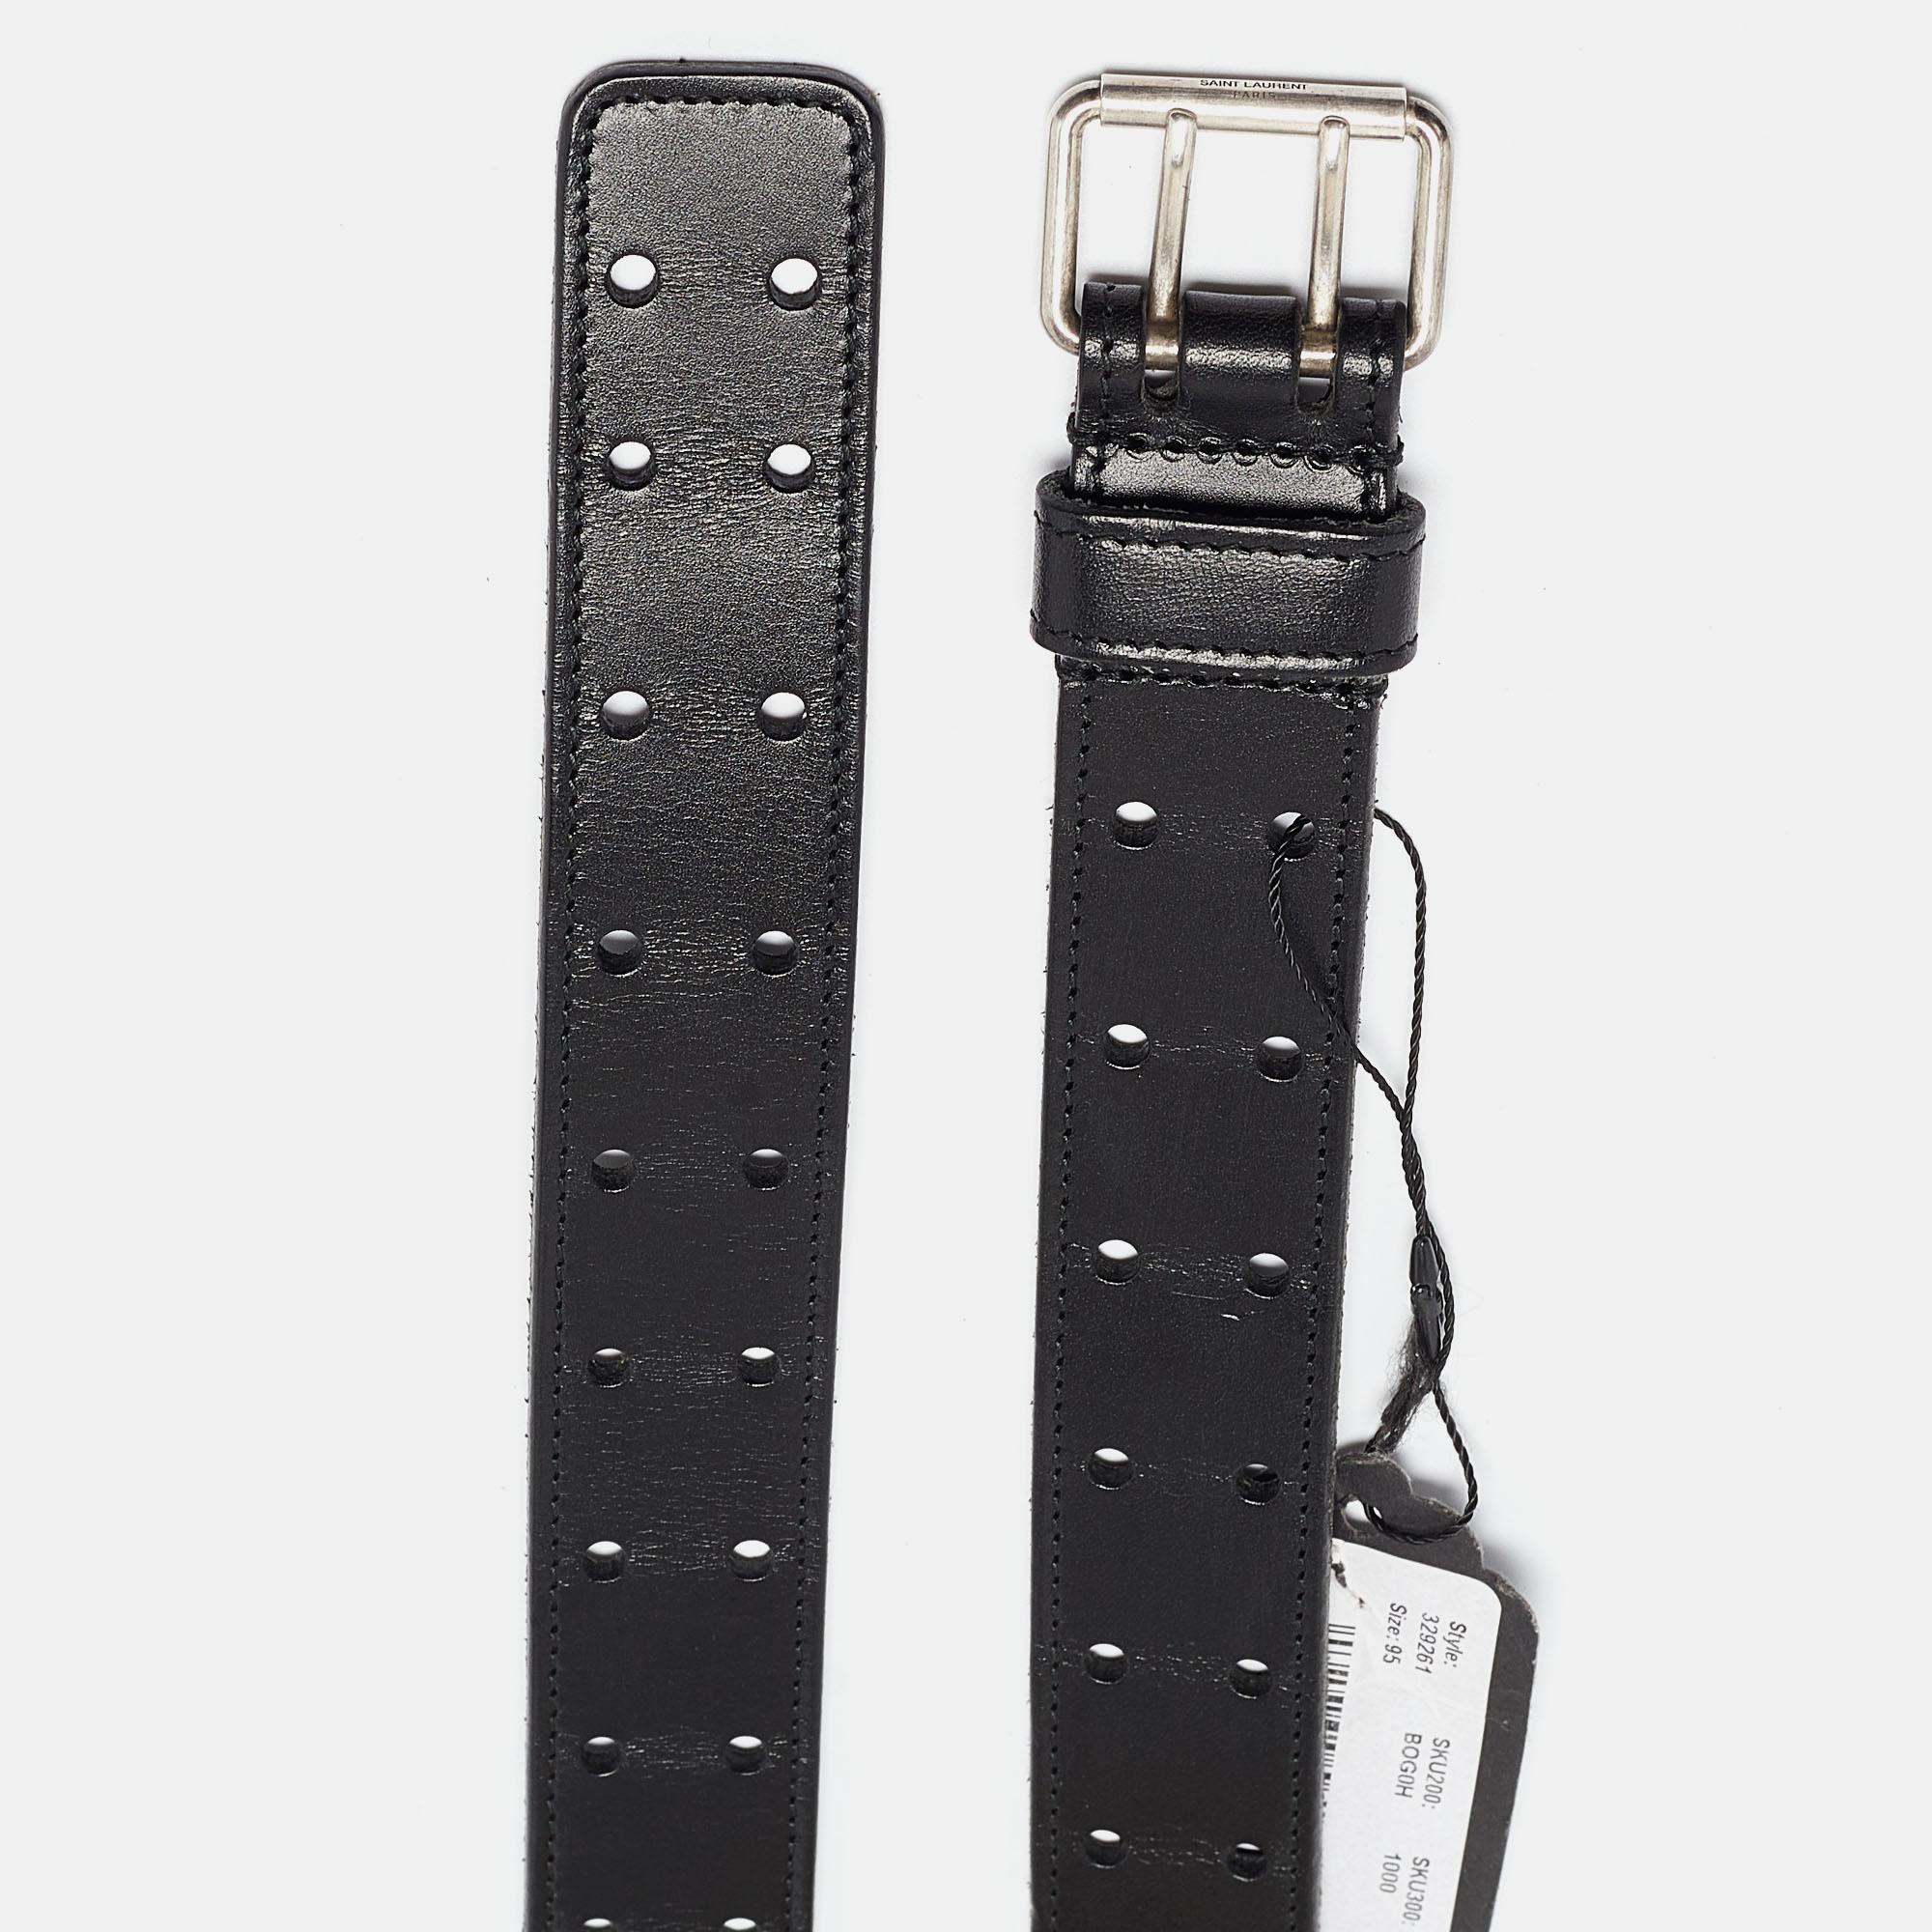 Let this belt be the newest addition to your collection of accessories. It is stylish, durable, and handy! Designed by Saint Laurent, you can use this creation with a variety of outfits.

